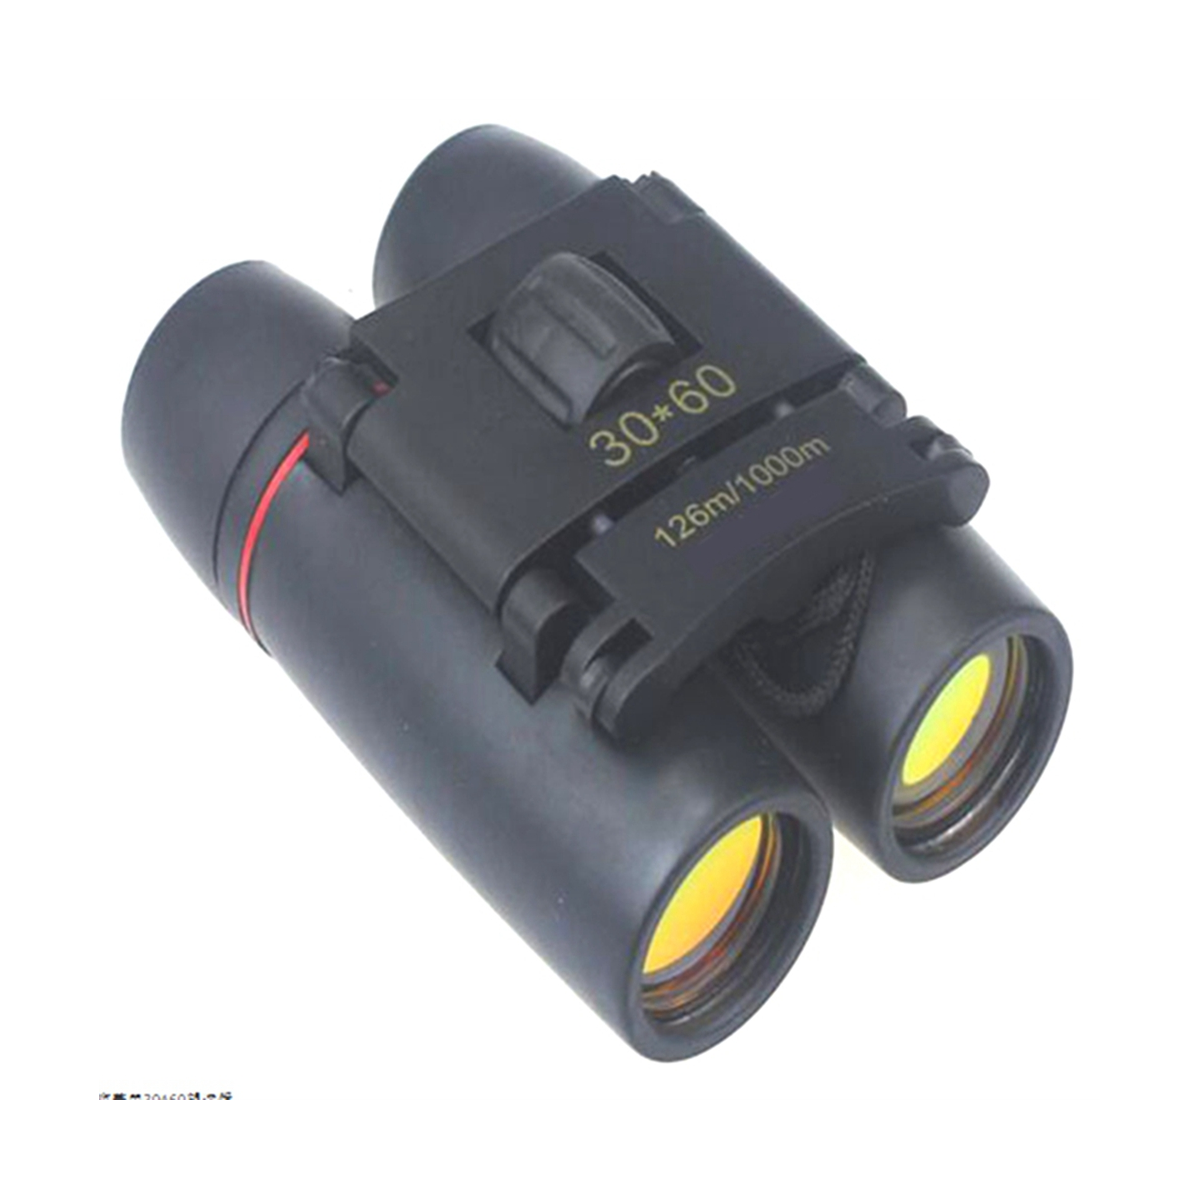 Binoculars for Adults & Kids - Compact & Pocket-Sized for Science,